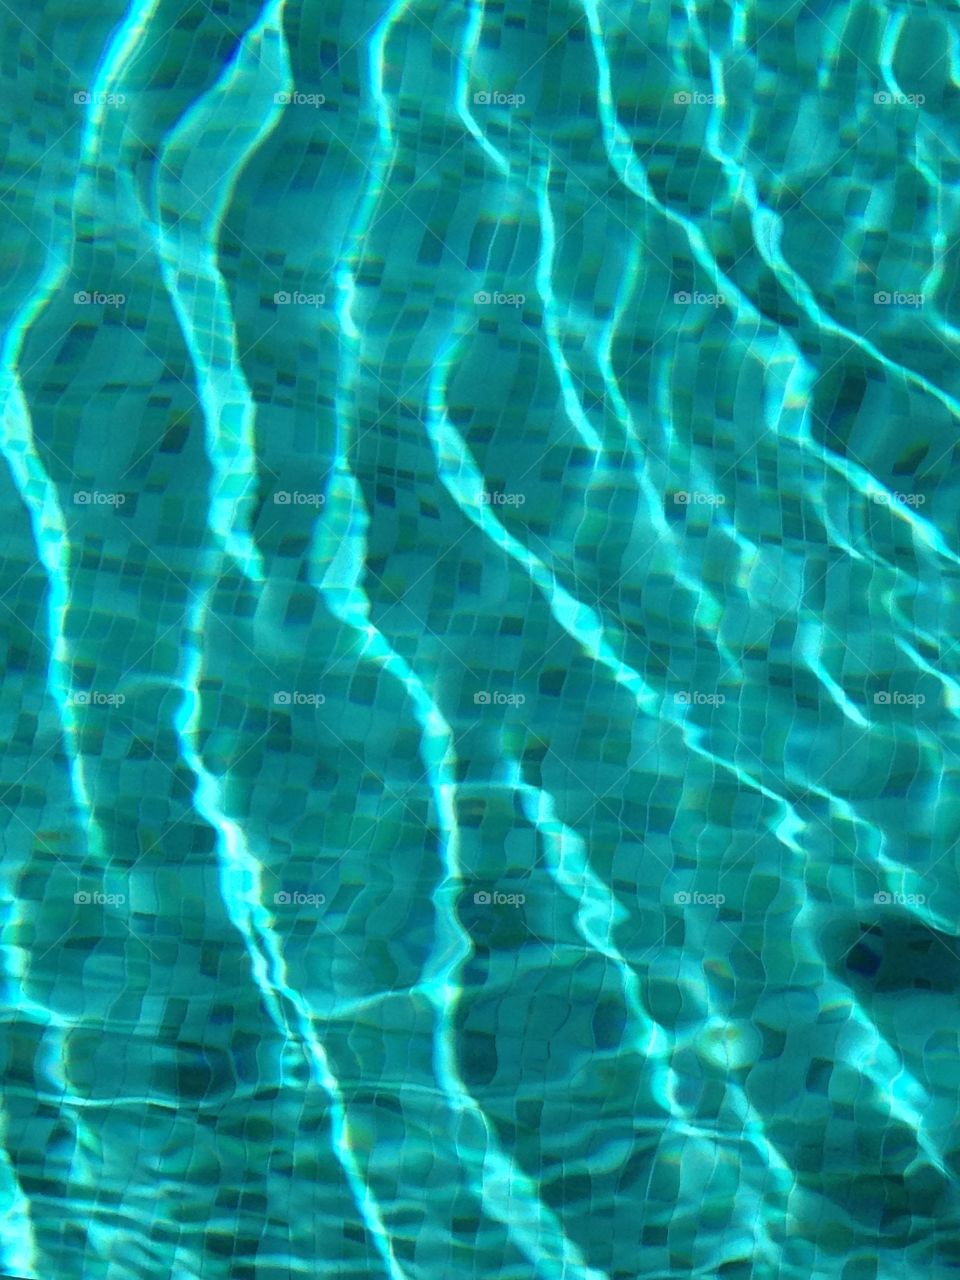 Light effects on water in swimming pool 